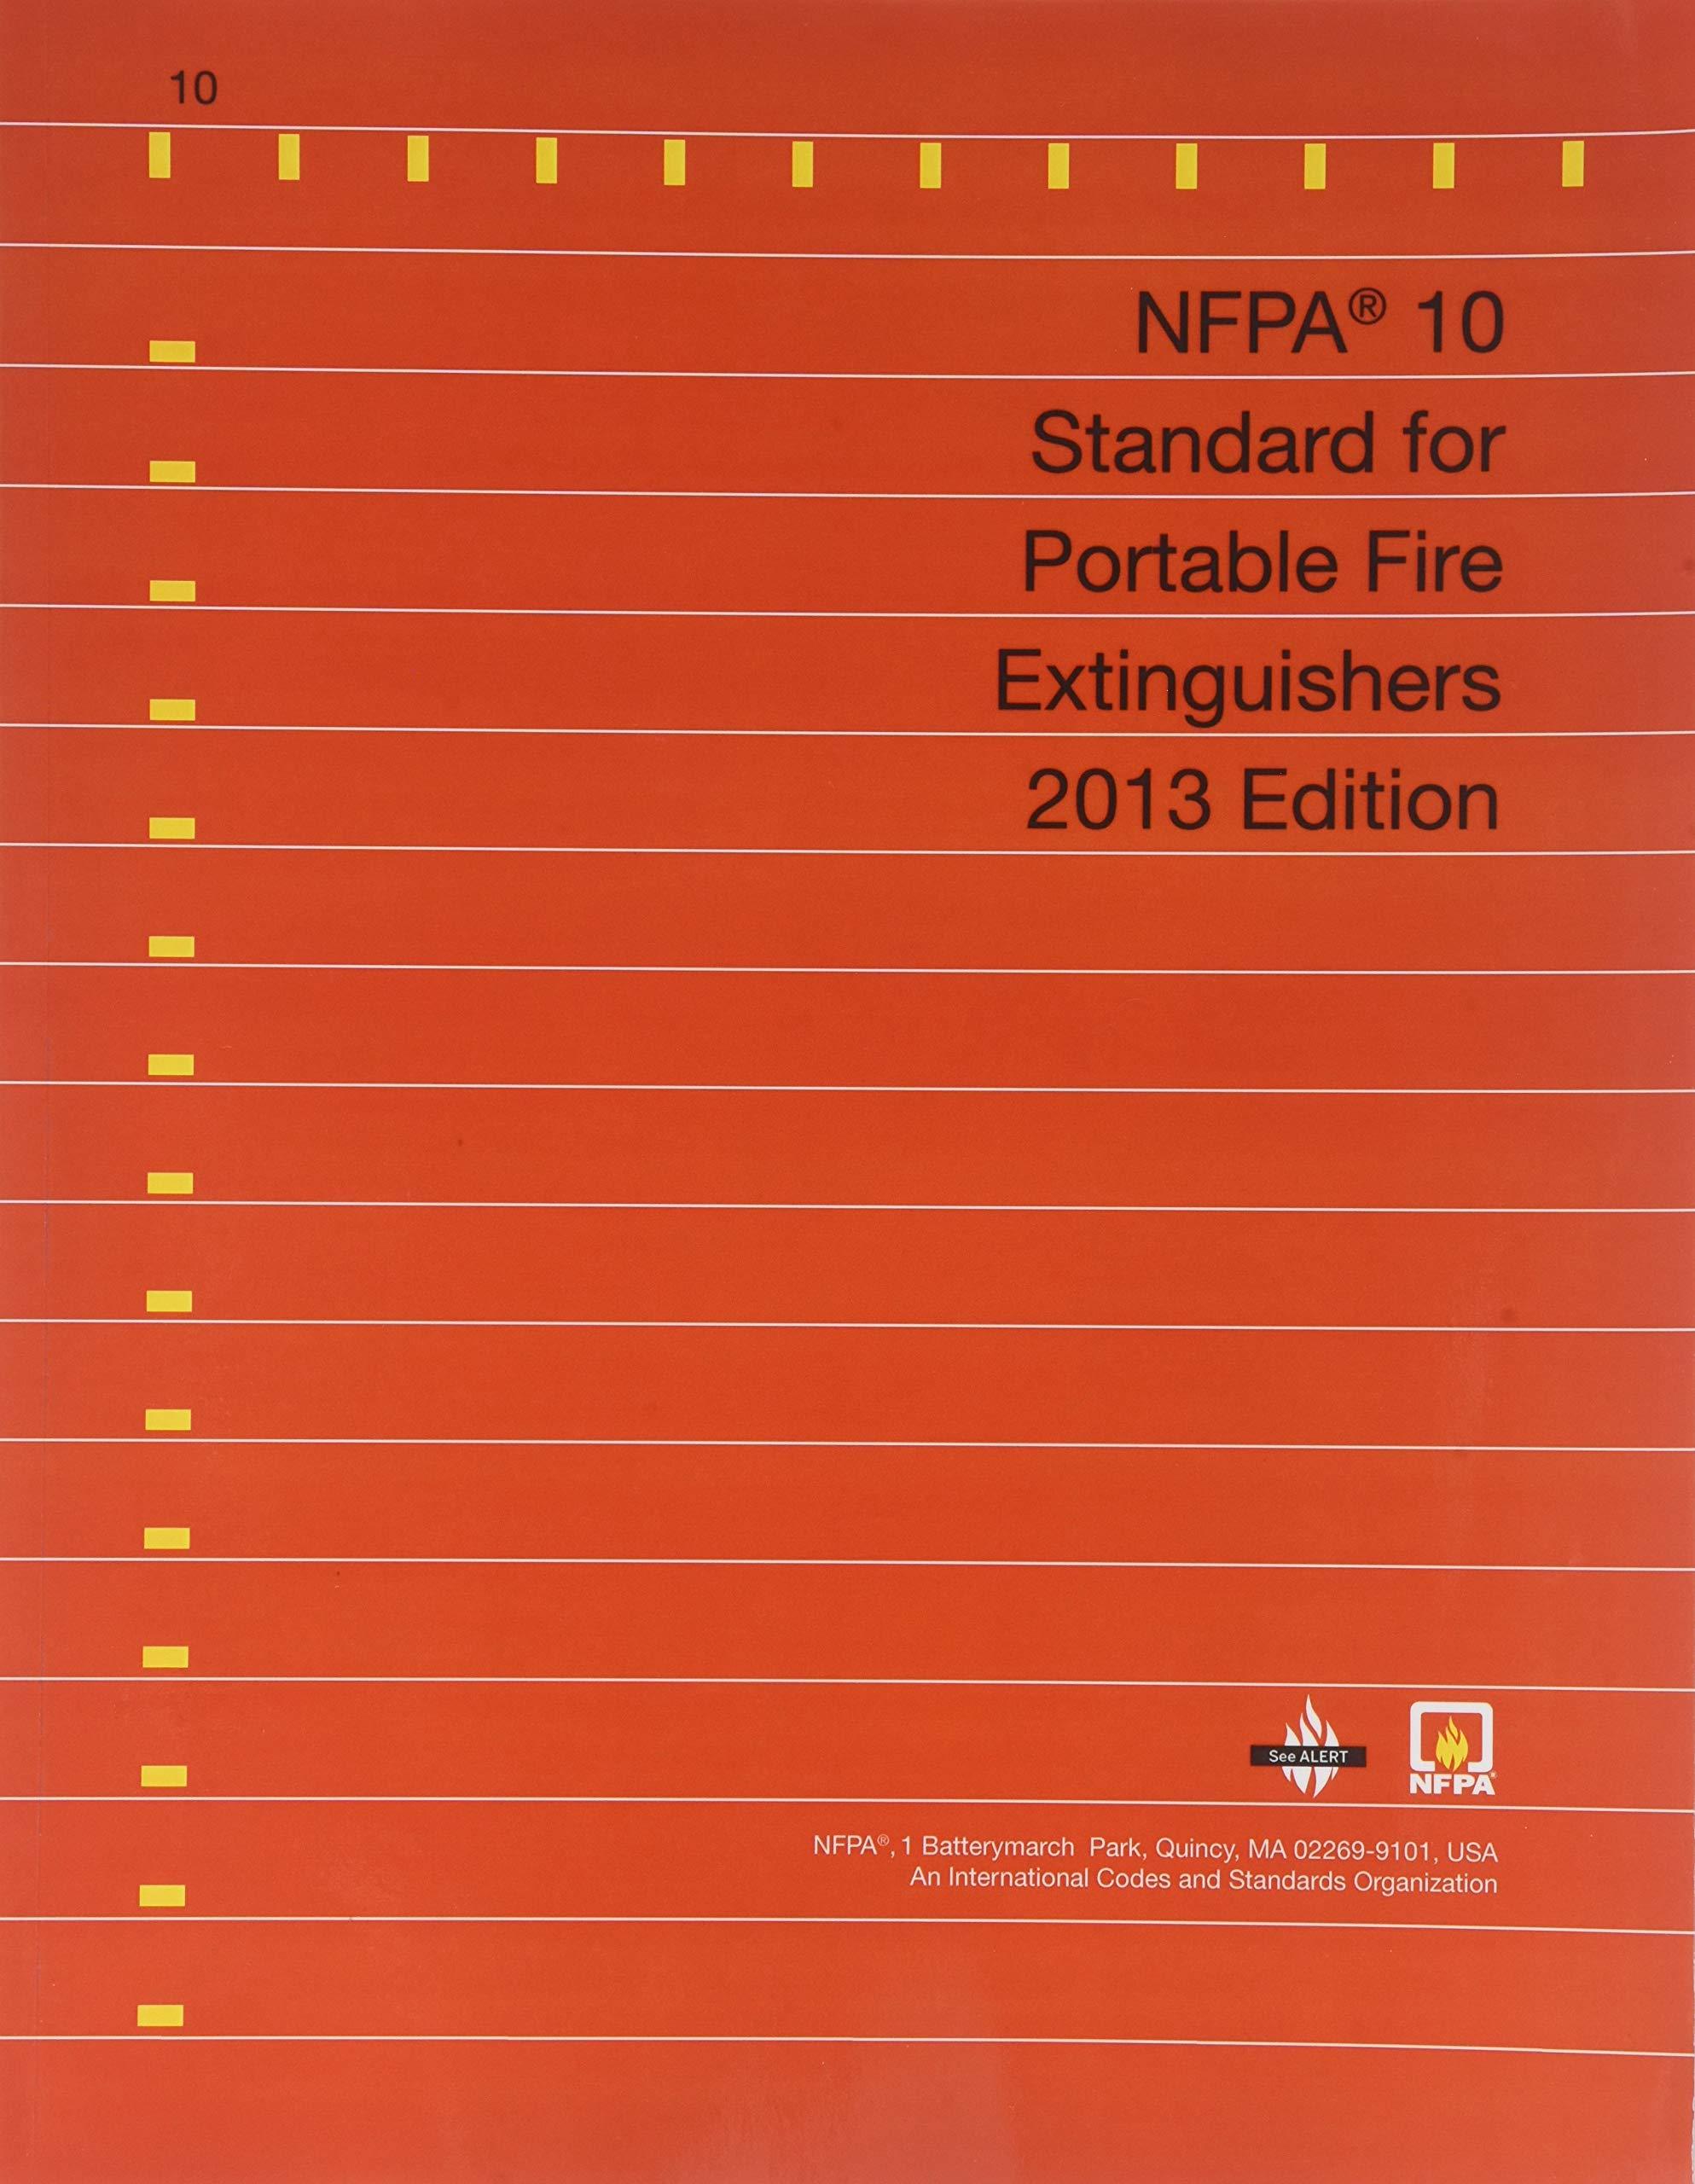 NFPA 10: Portable Fire Extinguishers